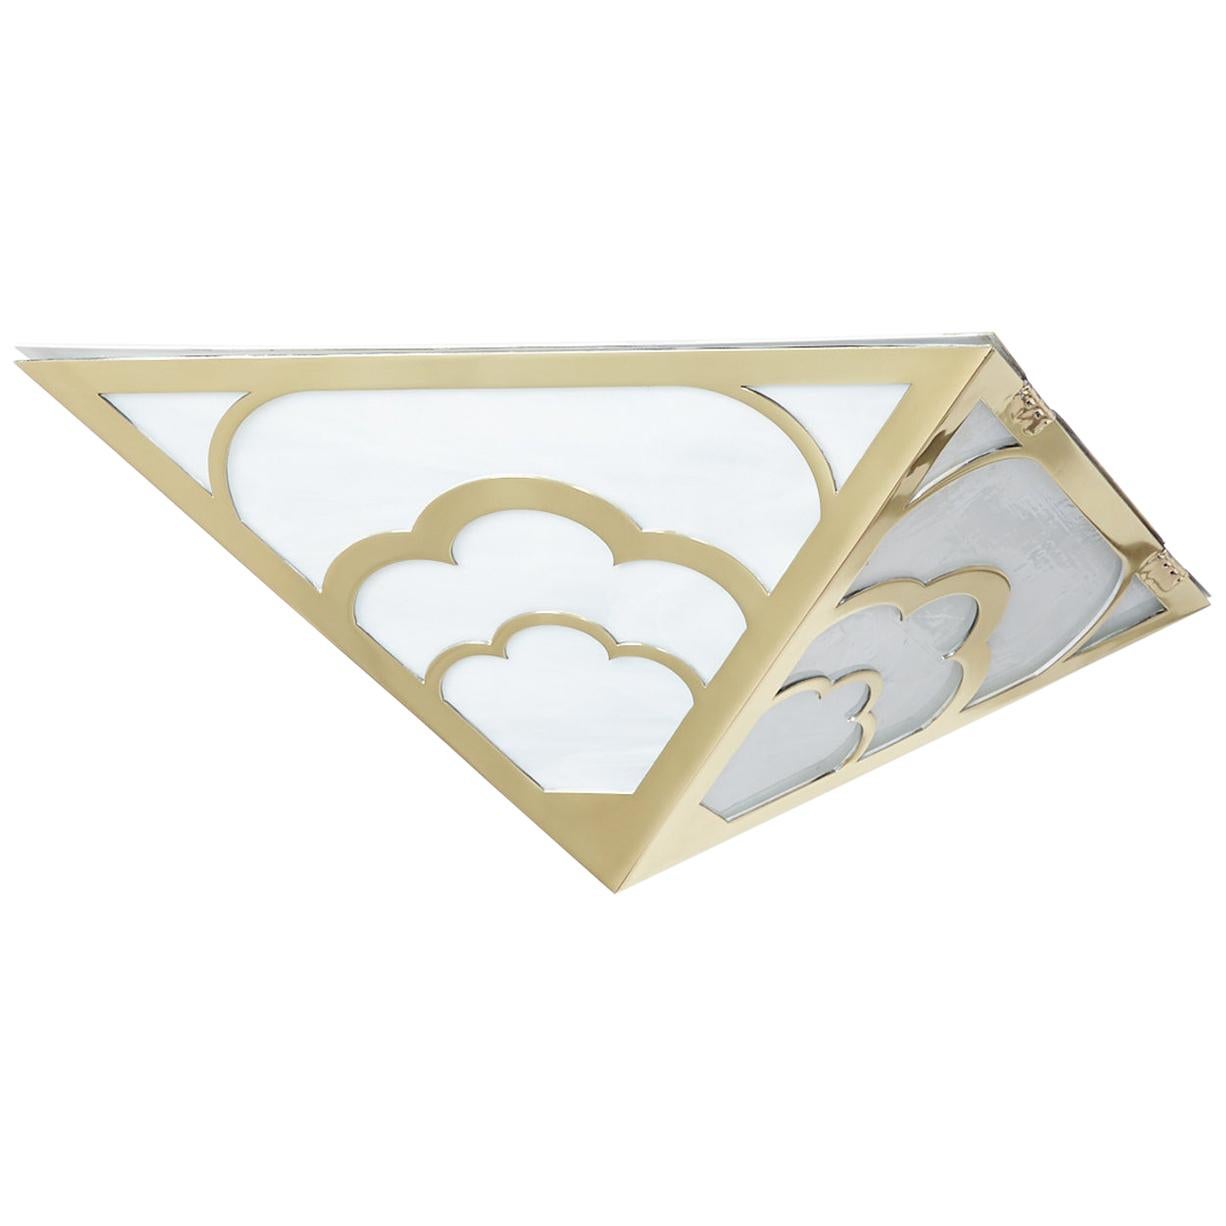 Nuages Deco Flush Mount in Brass by David Duncan For Sale